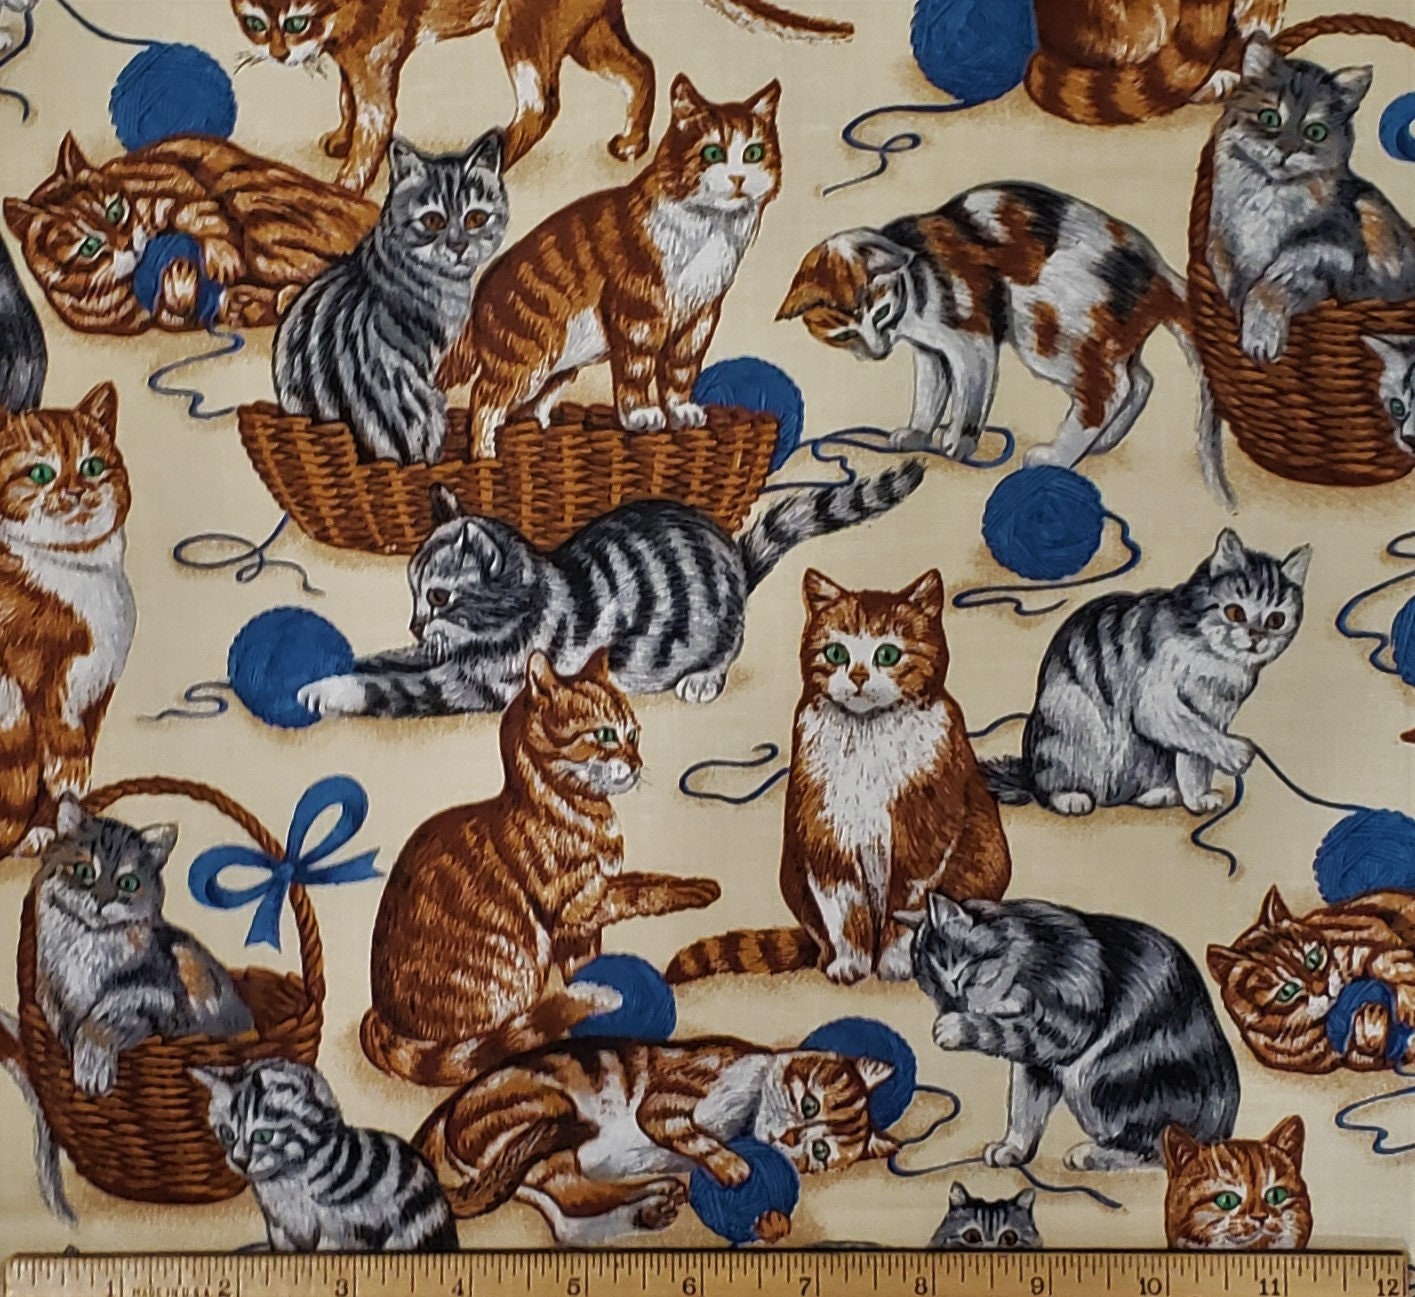 EOB - A V.I.P. Print Cranston Print Works, Co. - Light Tan Fabric / Brown and Gray Cats in Baskets Playing with Balls of Blue Yarn